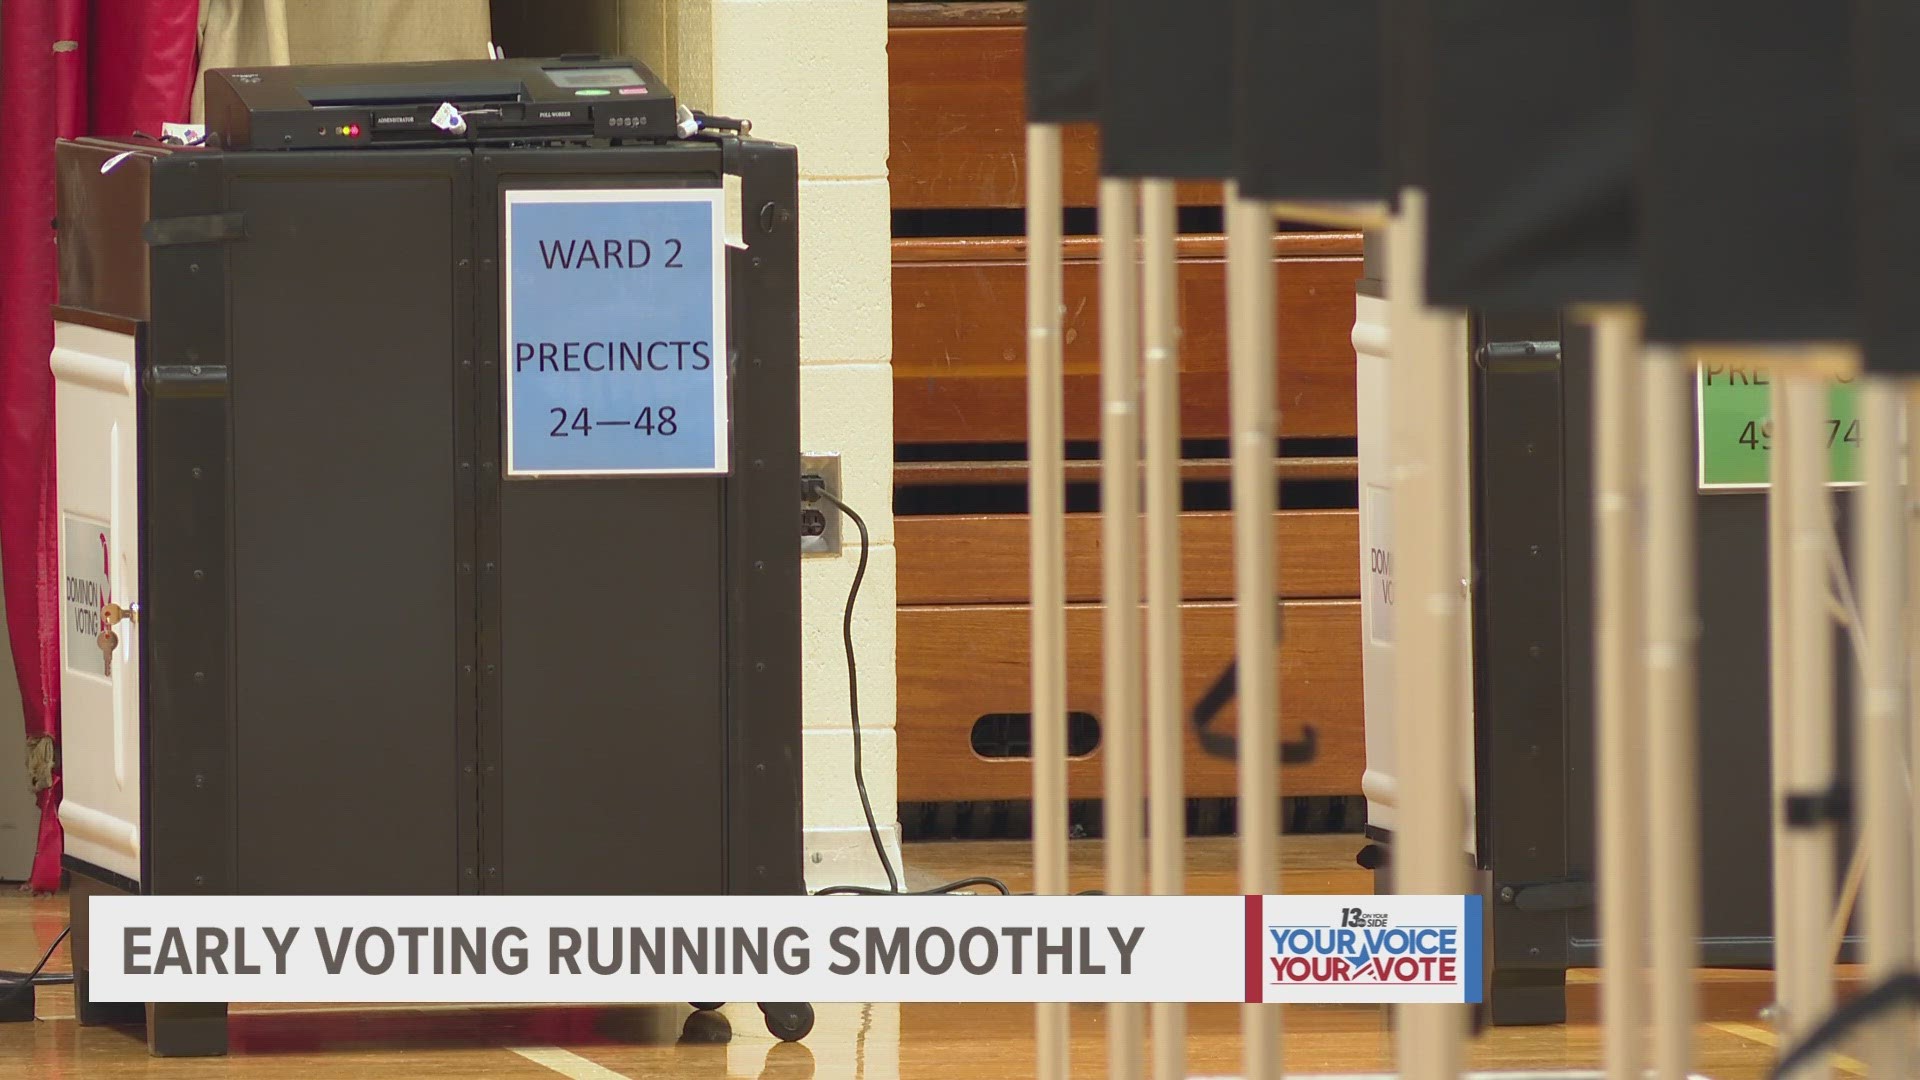 WZZM's political reporter Josh Alburtus explains the meaning of voting "uncommitted."